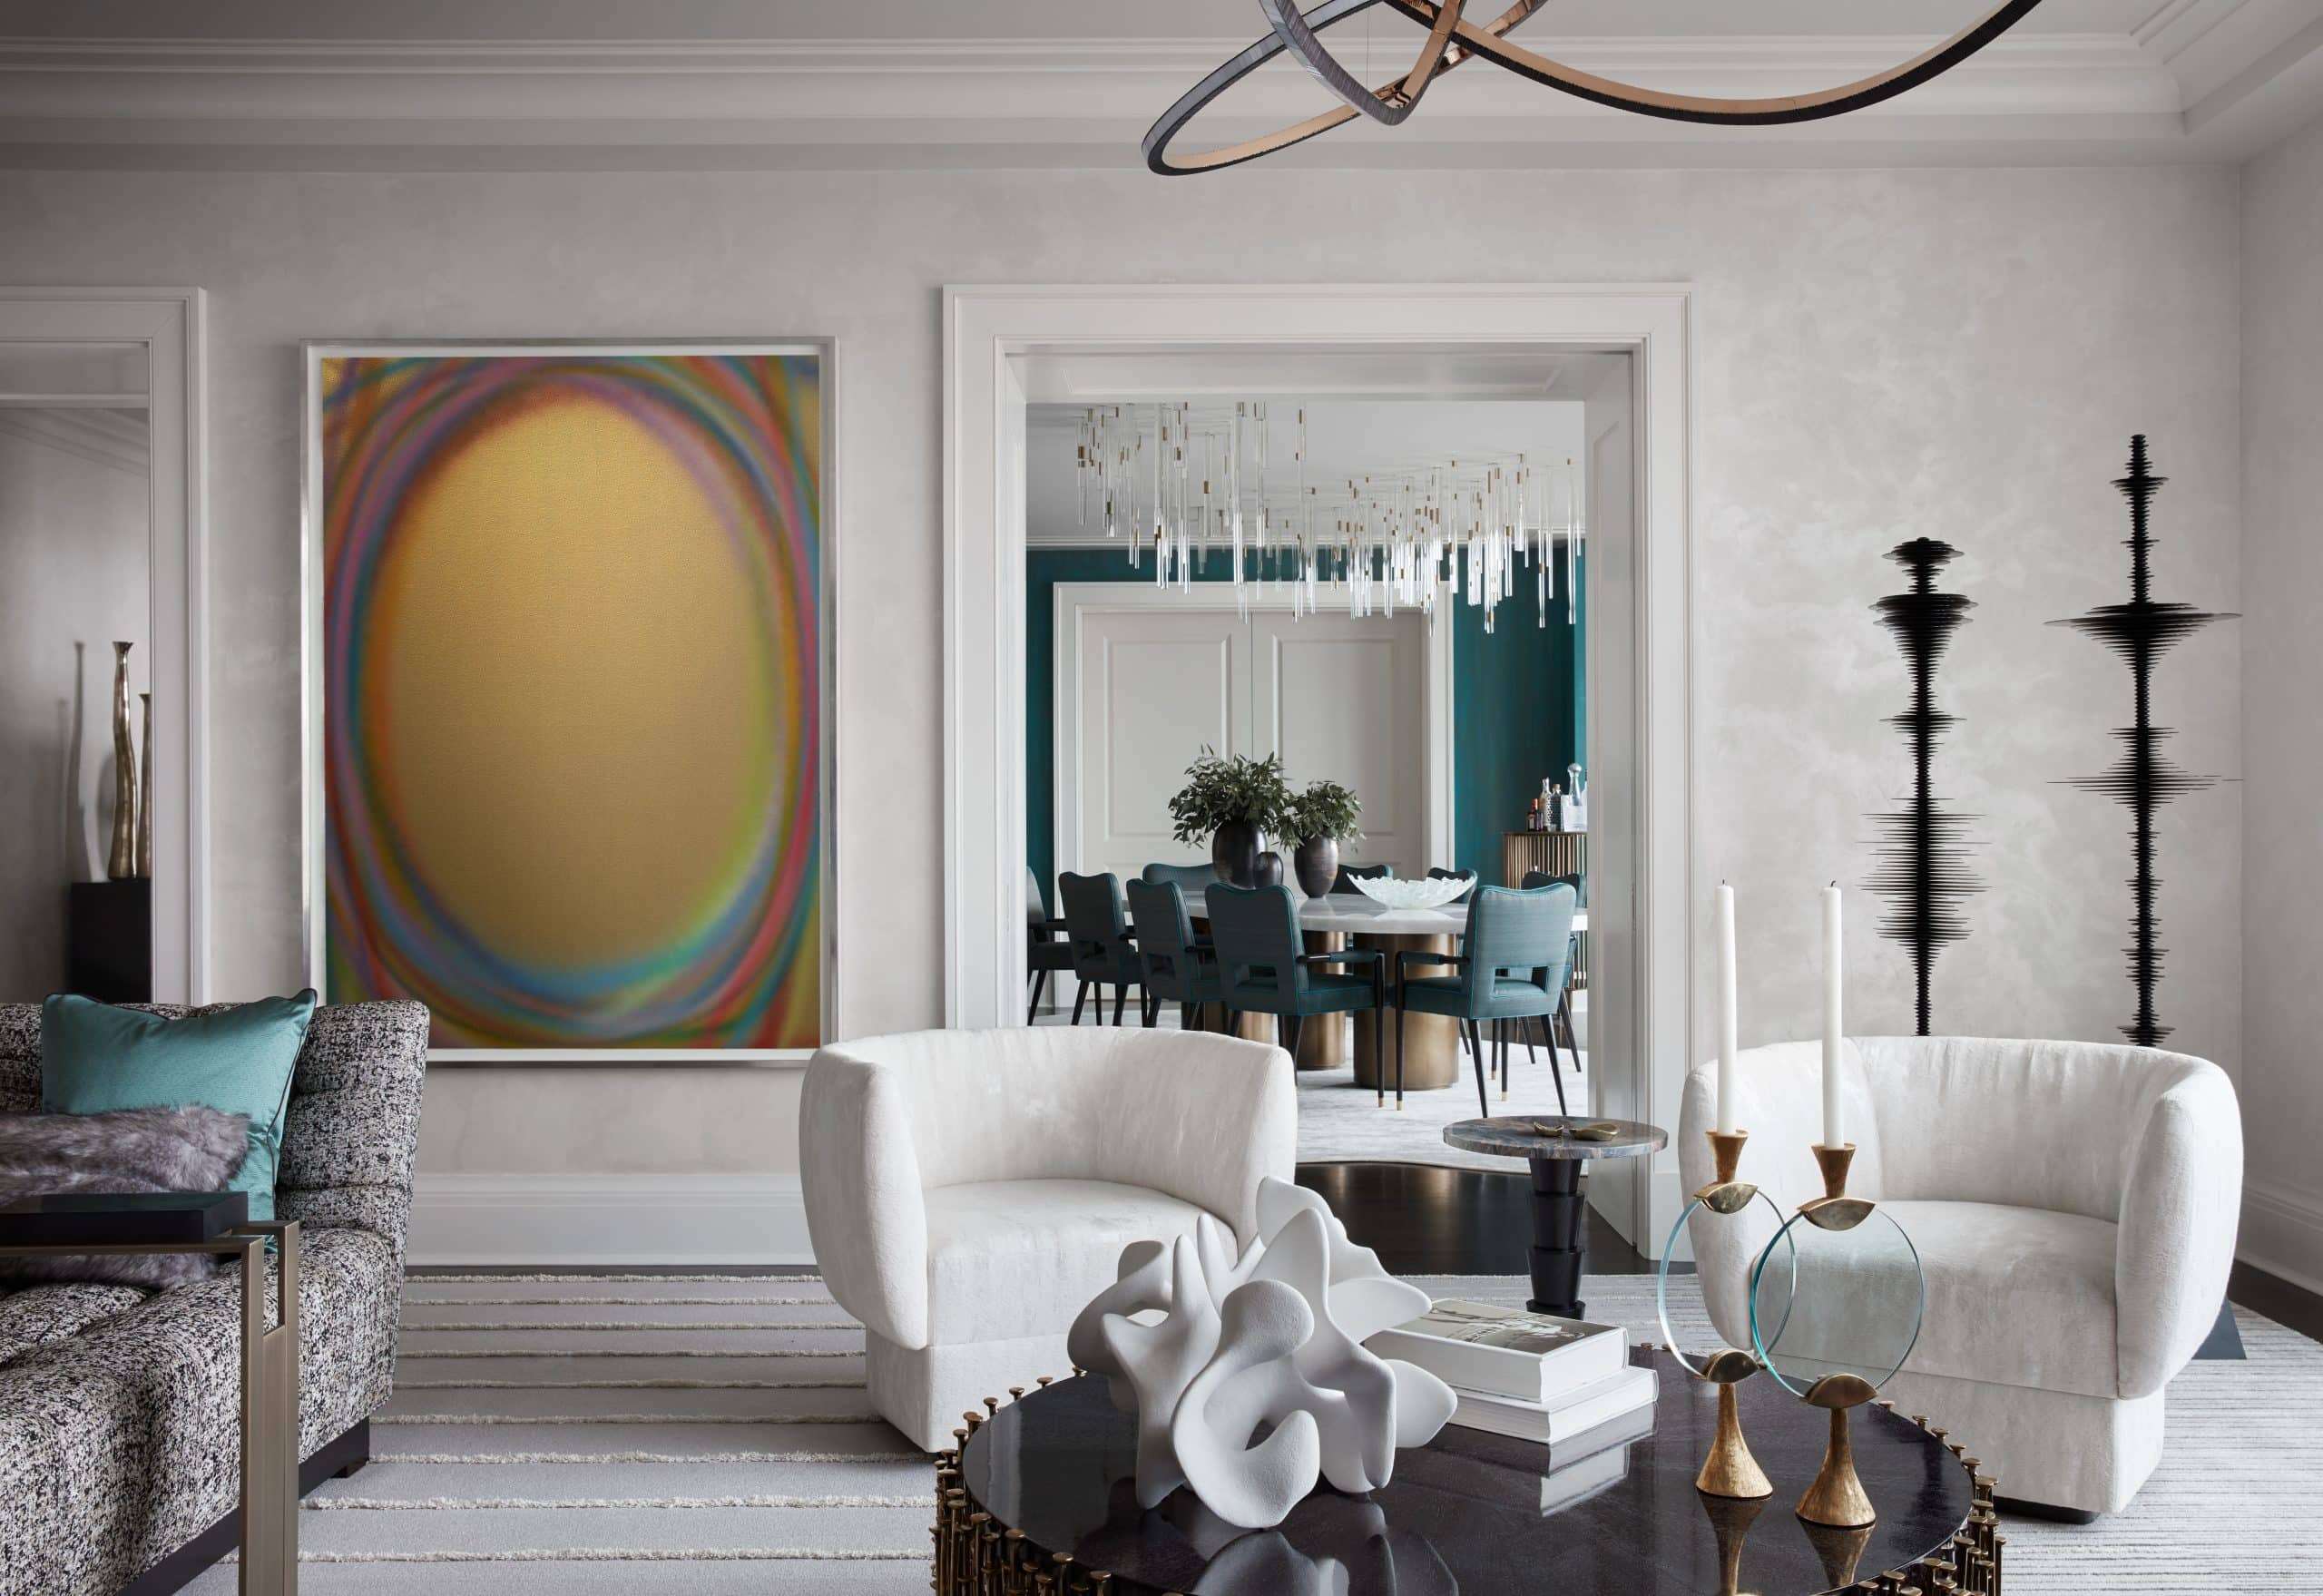 Living room of Manhattan apartment designed by Drake/Anderson's Caleb Anderson Jamie Drake with pair of curving white chairs, gray day bed, contemporary art